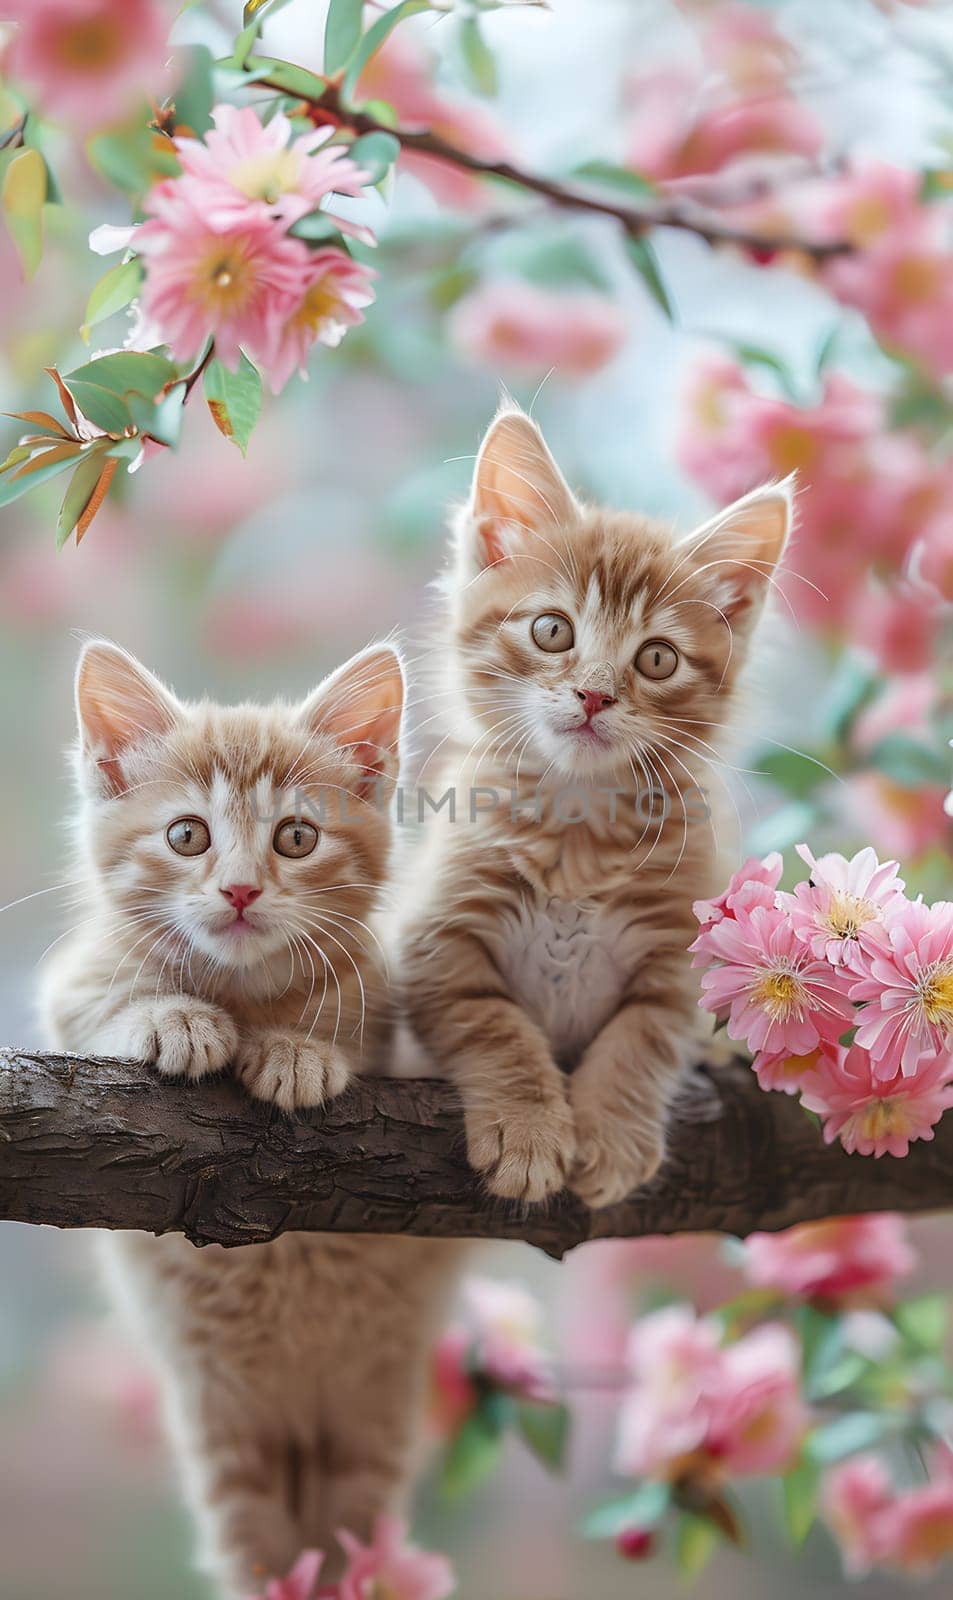 Two small to mediumsized cats from the Felidae family, known as kittens, are perched on a tree branch with pink flowers surrounding them